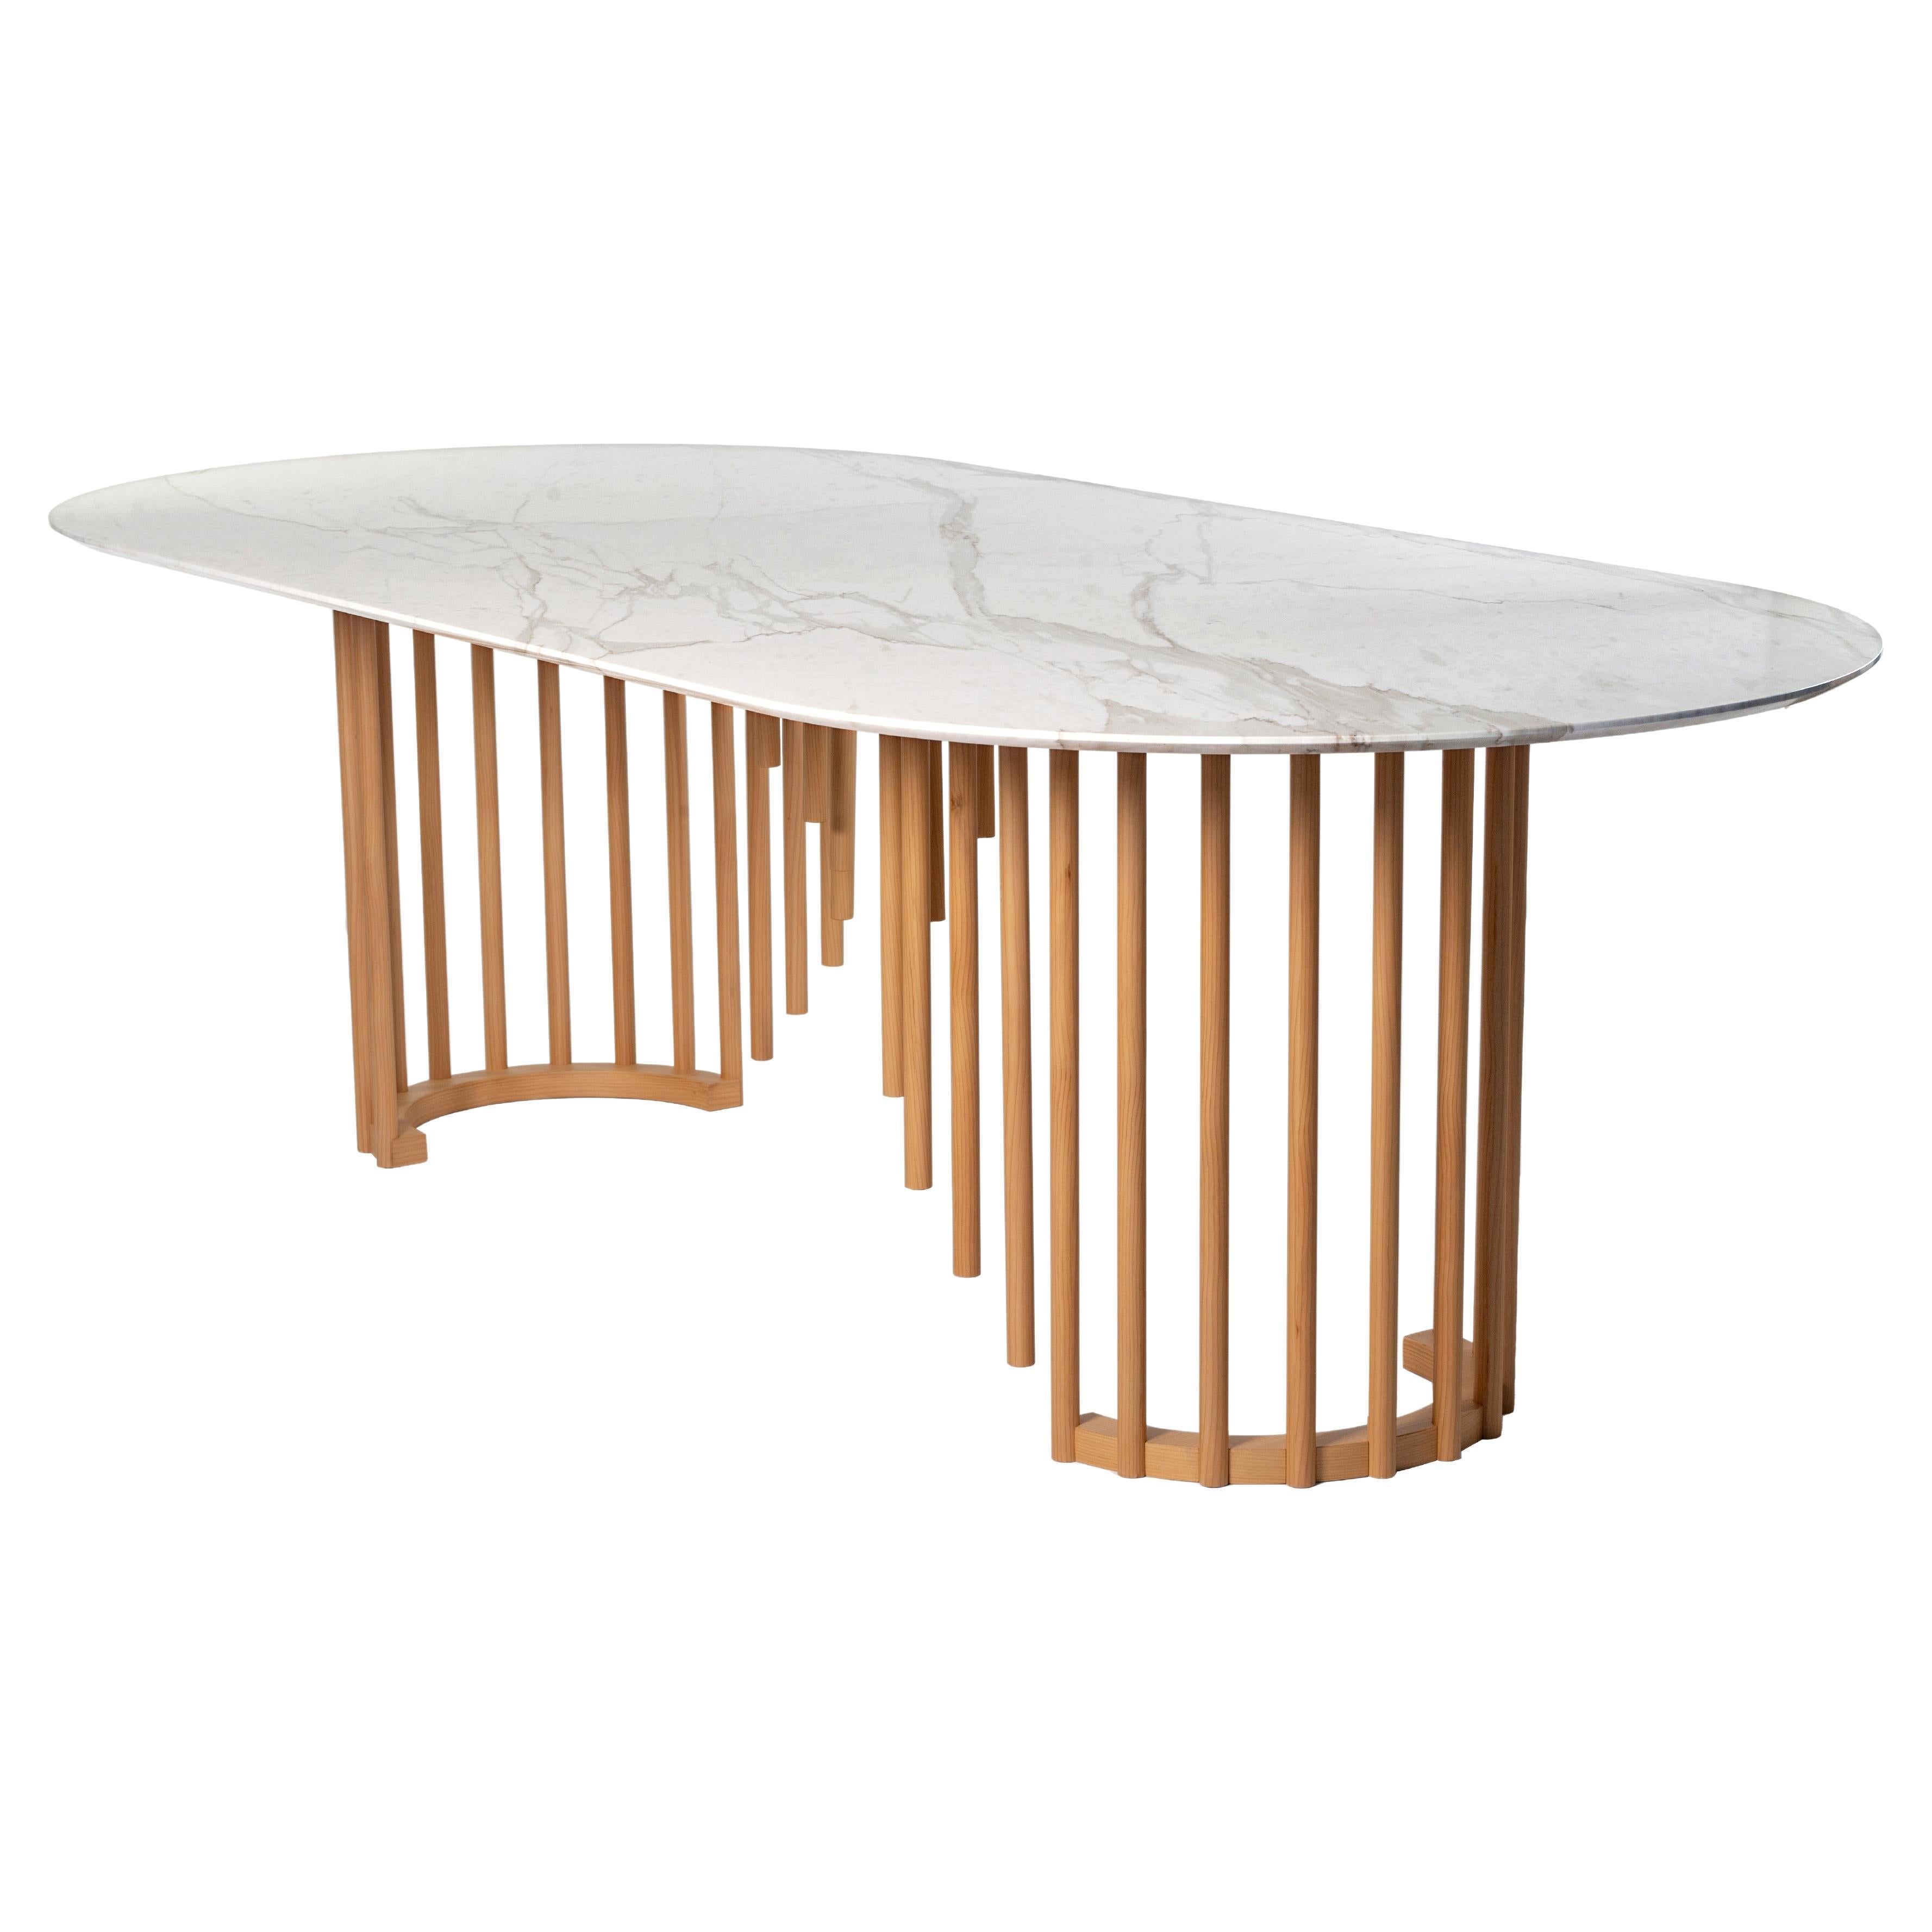 Hebanon Fratelli Basile Conference Tables